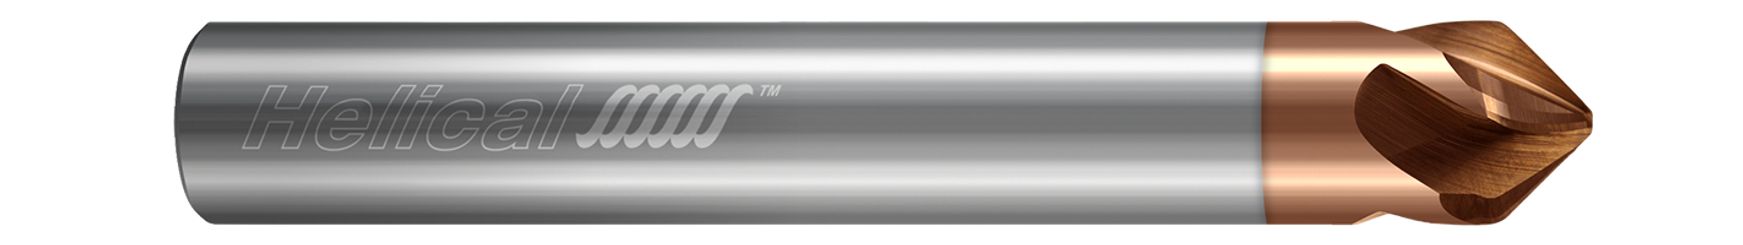 Multi-Axis Finishers-4 Flute-Taper Form (Tplus)